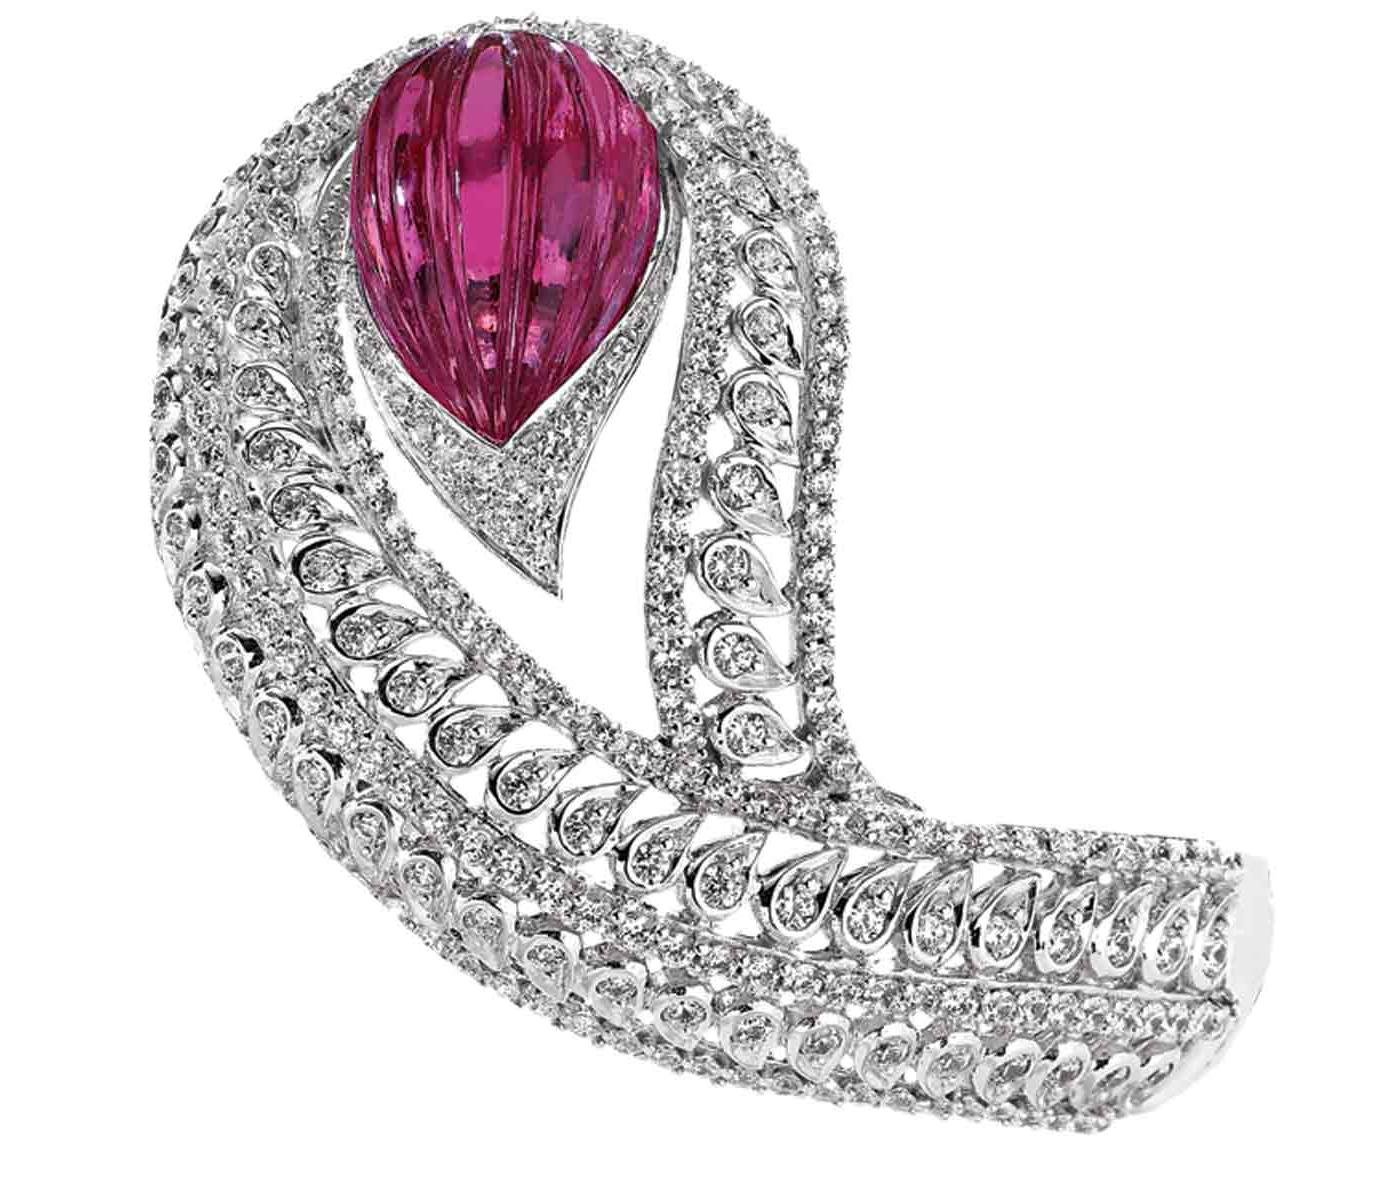 Ring by Priority Gems